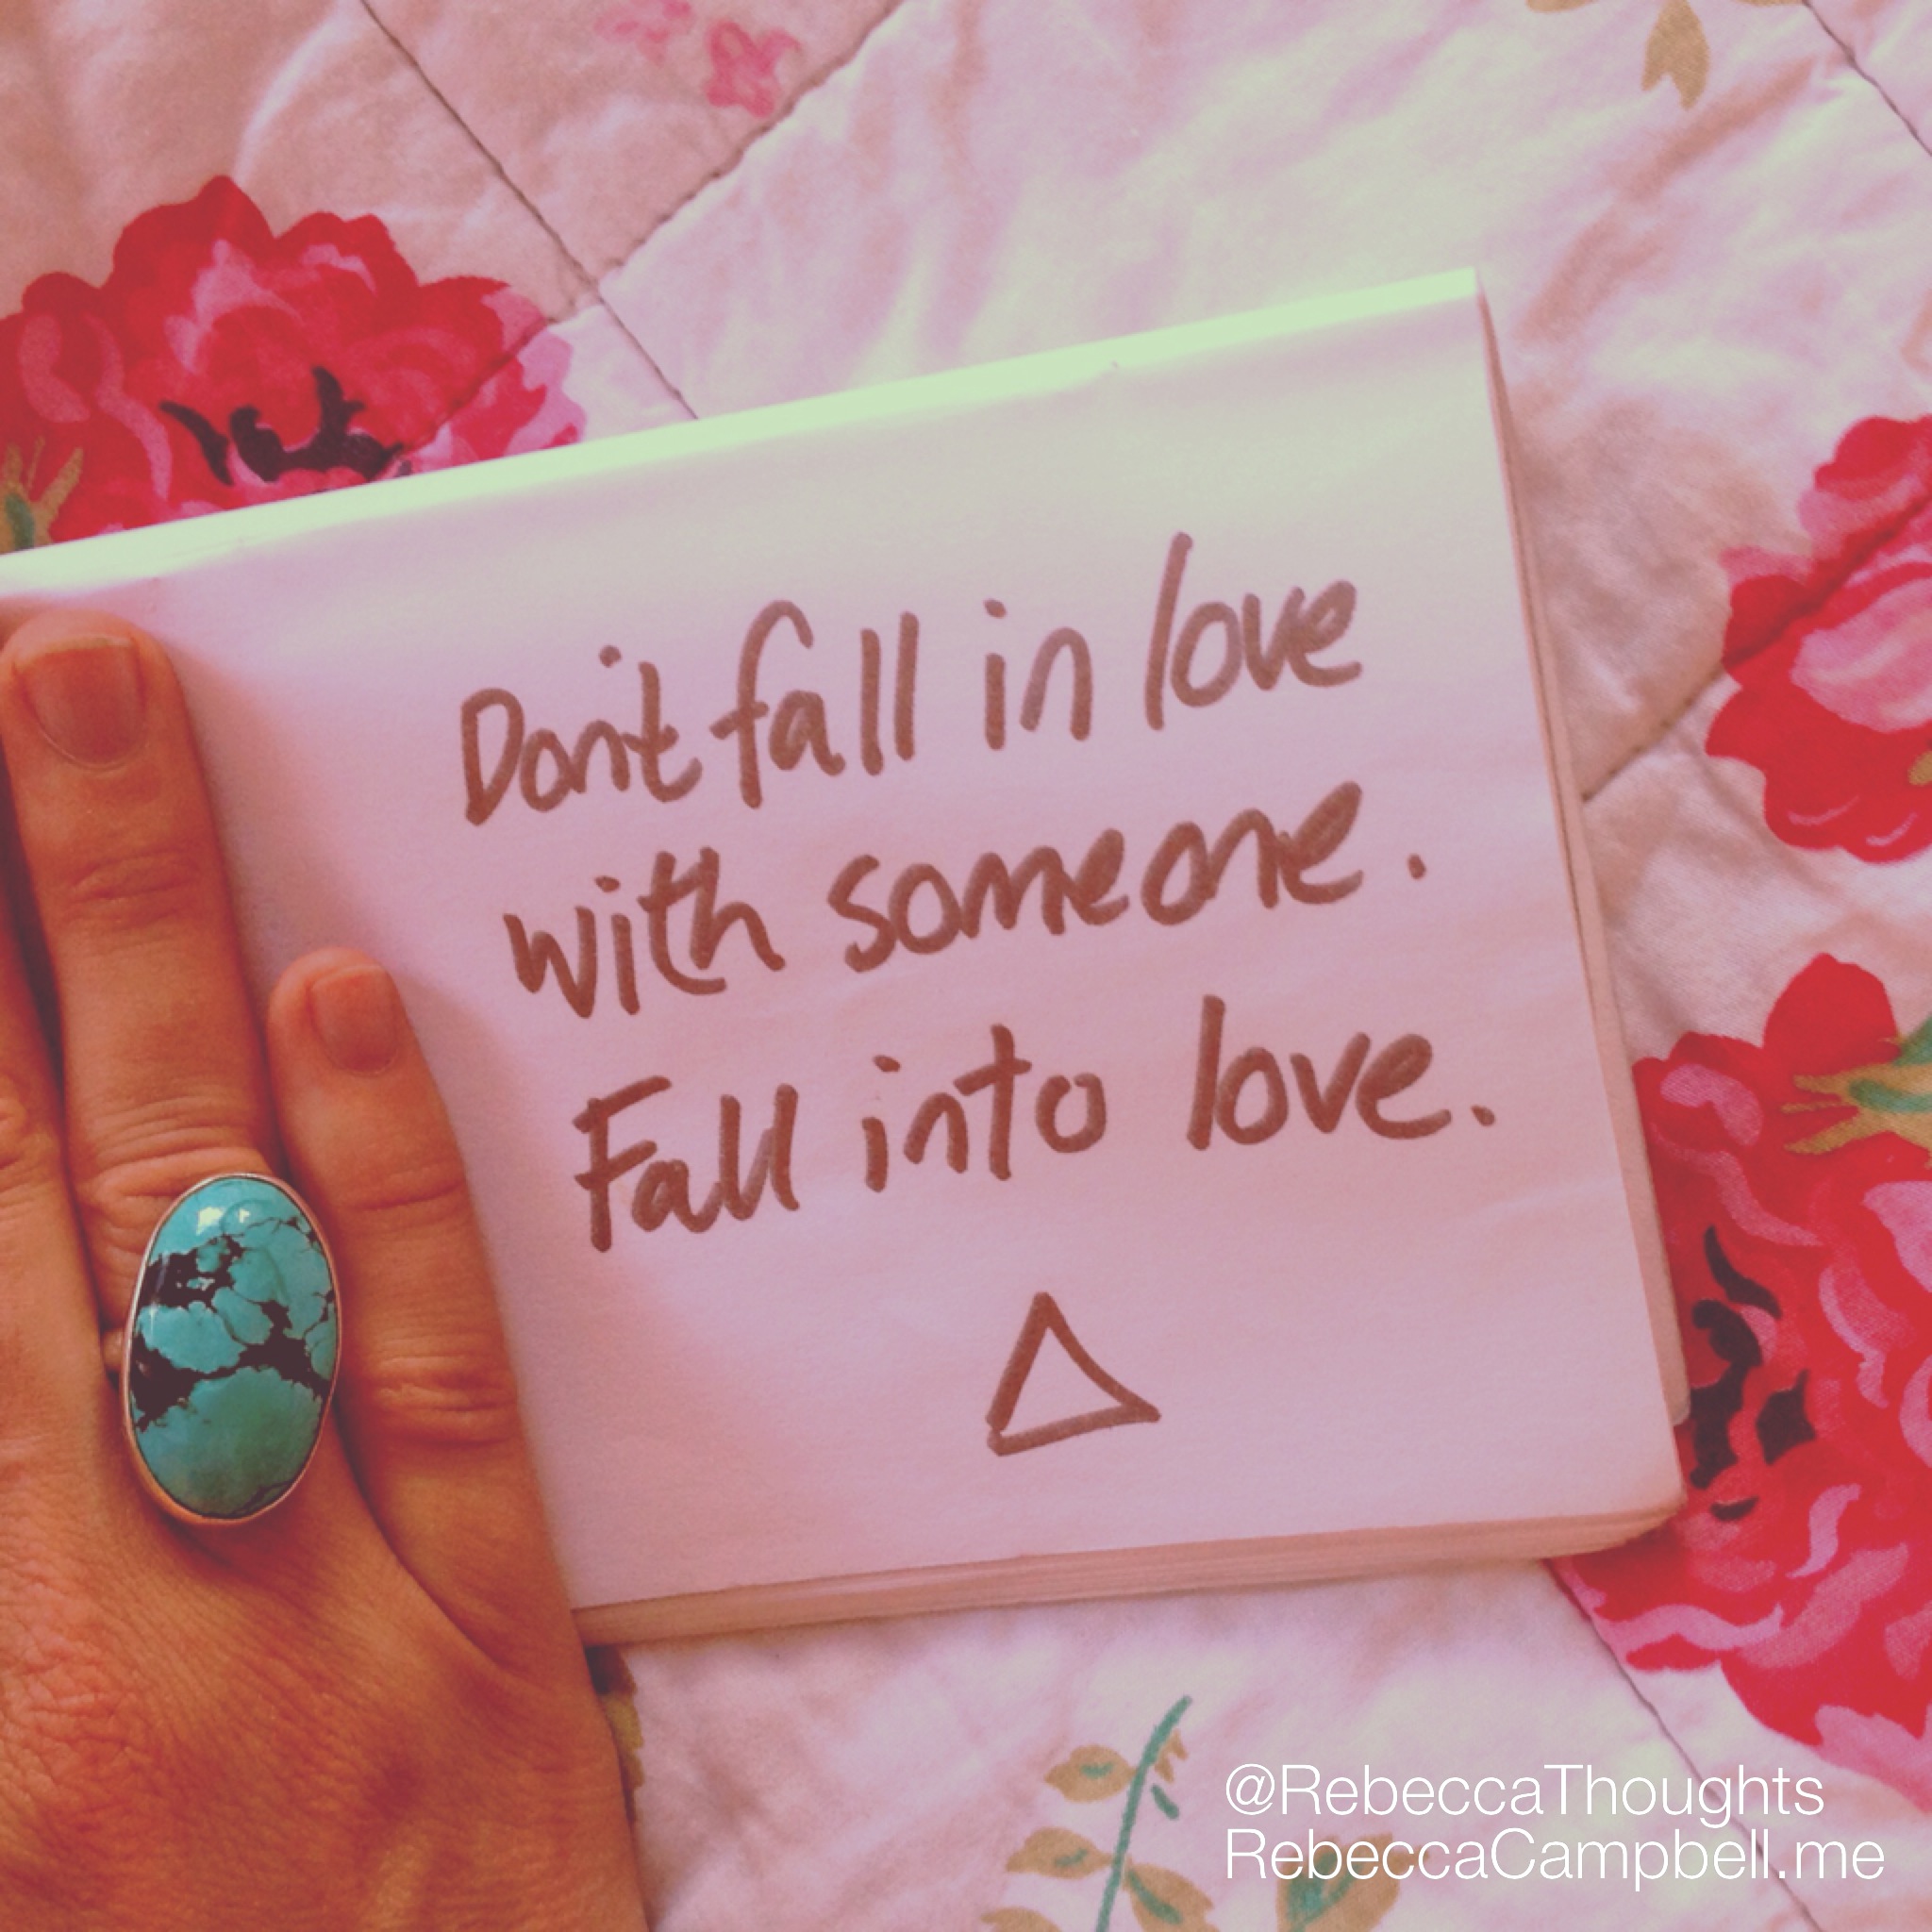 Some people fall in love